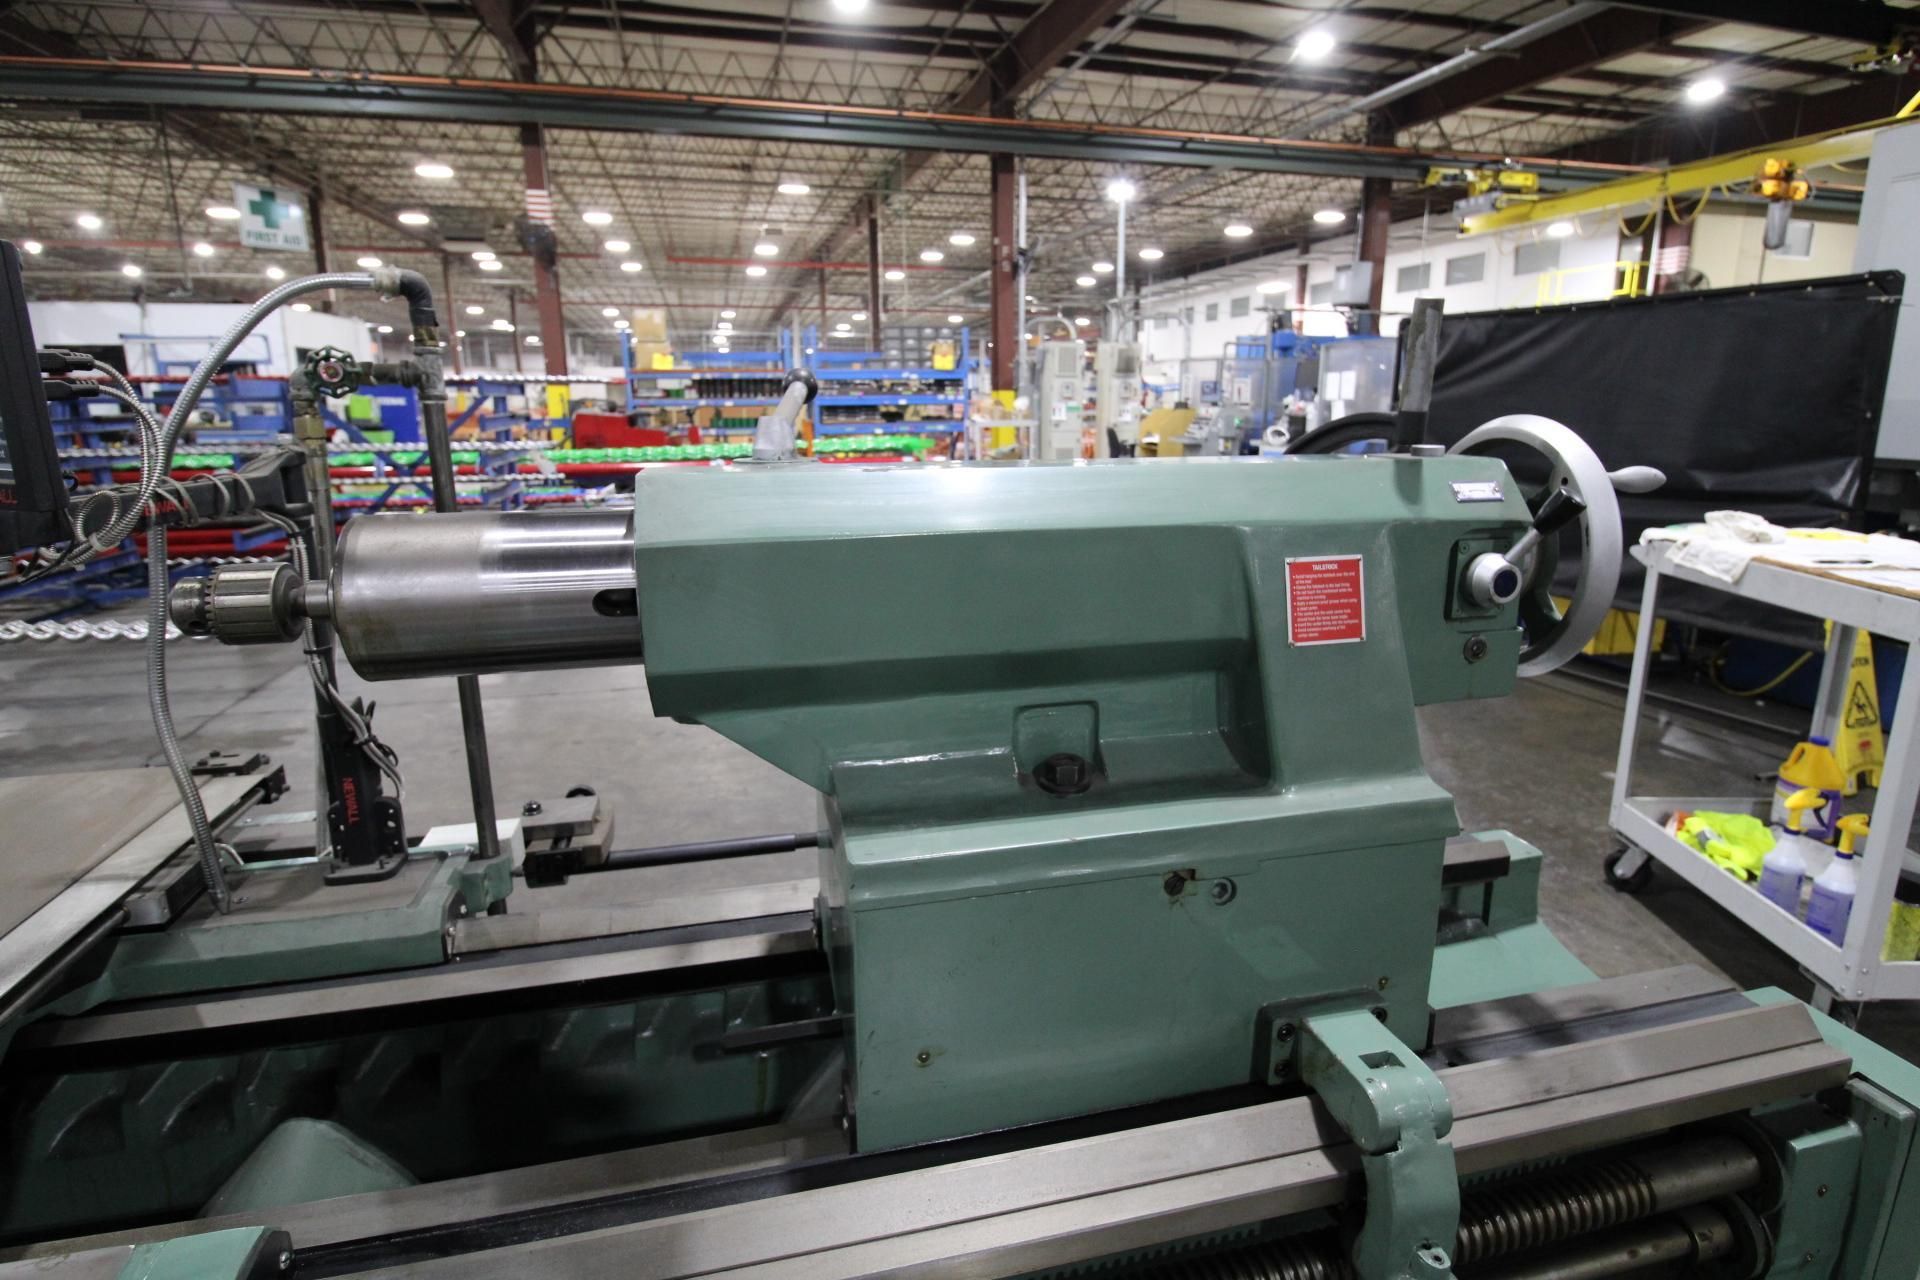 HOLLOW SPINDLE LATHE, KINGSTON HEAVY DUTY 34 HP-2000, new 2014, never used in production, 7-1/4" sp - Image 13 of 23